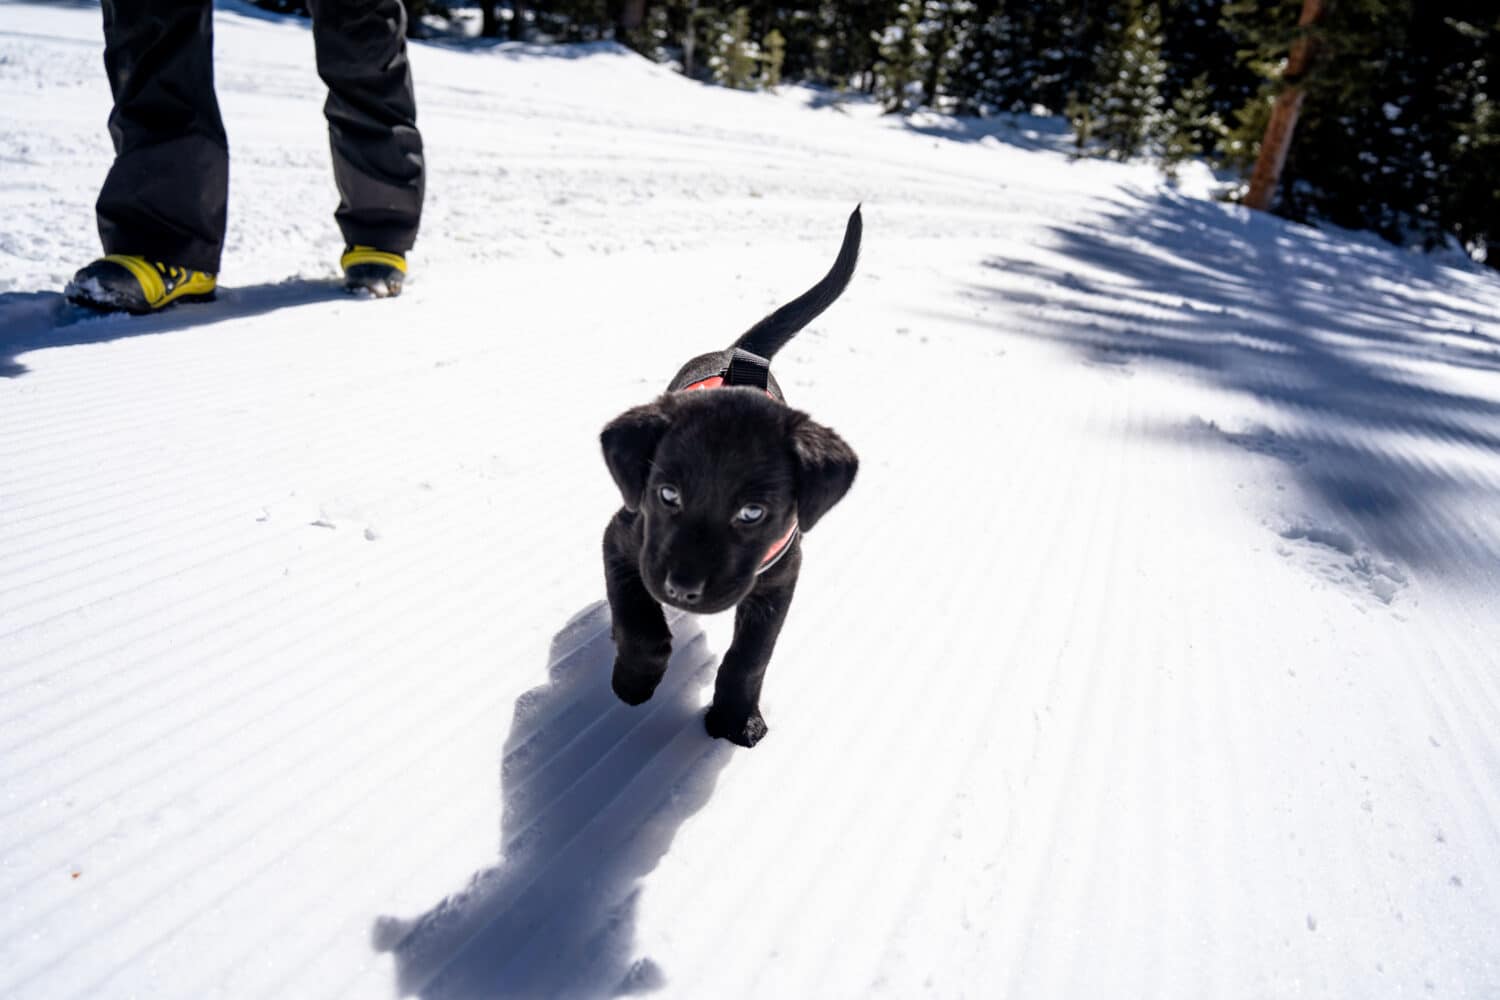 Read more: Meet Ember the Avalanche Puppy